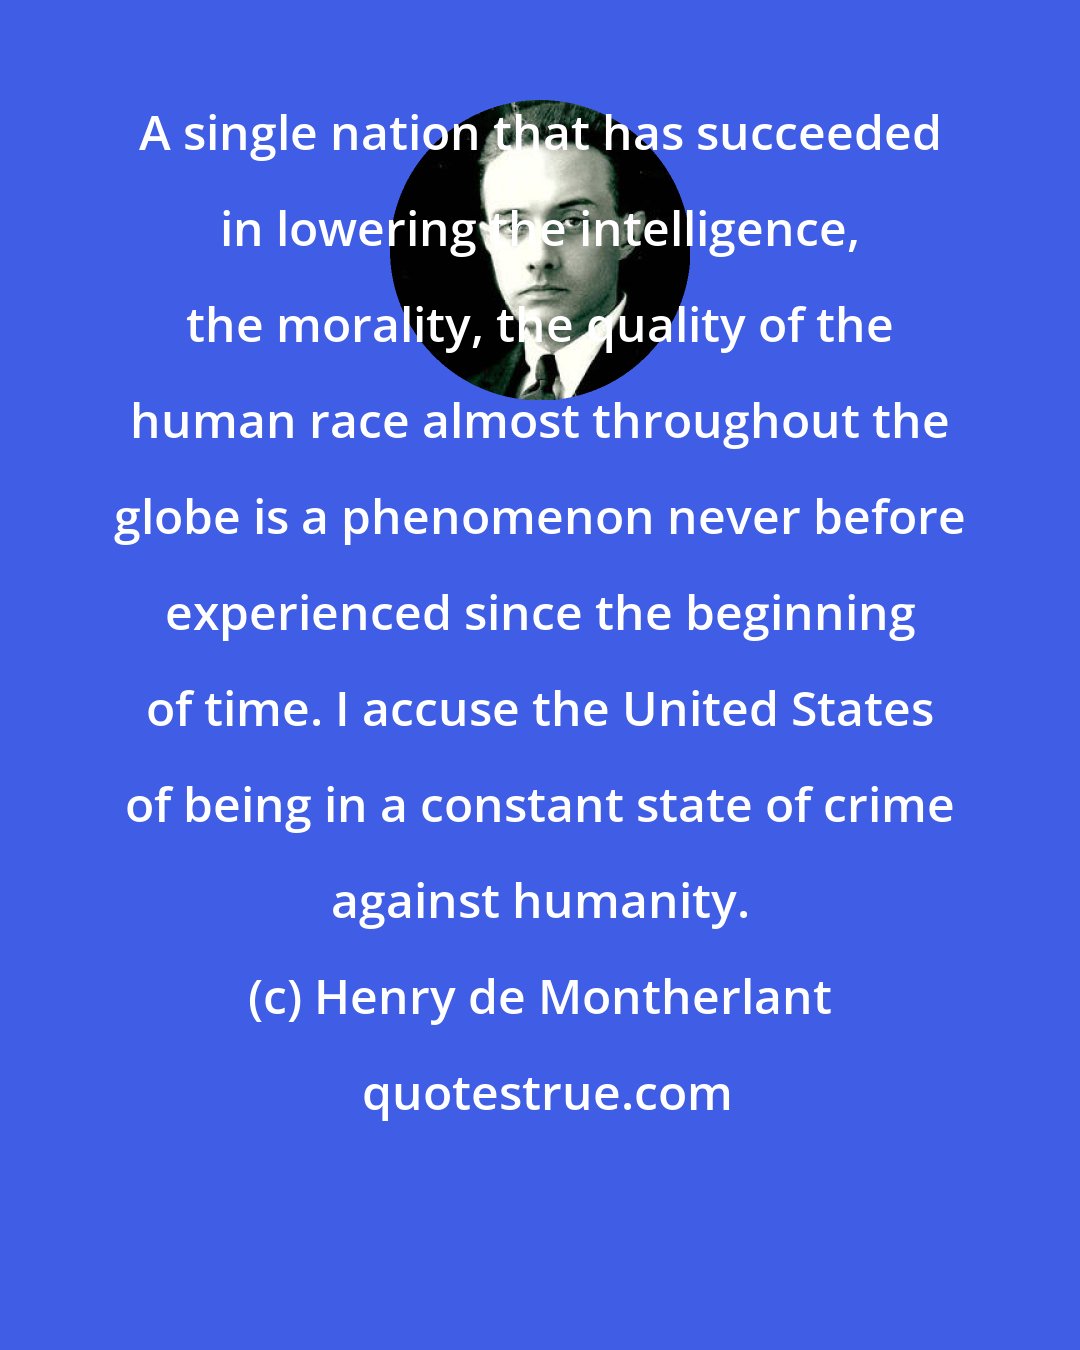 Henry de Montherlant: A single nation that has succeeded in lowering the intelligence, the morality, the quality of the human race almost throughout the globe is a phenomenon never before experienced since the beginning of time. I accuse the United States of being in a constant state of crime against humanity.